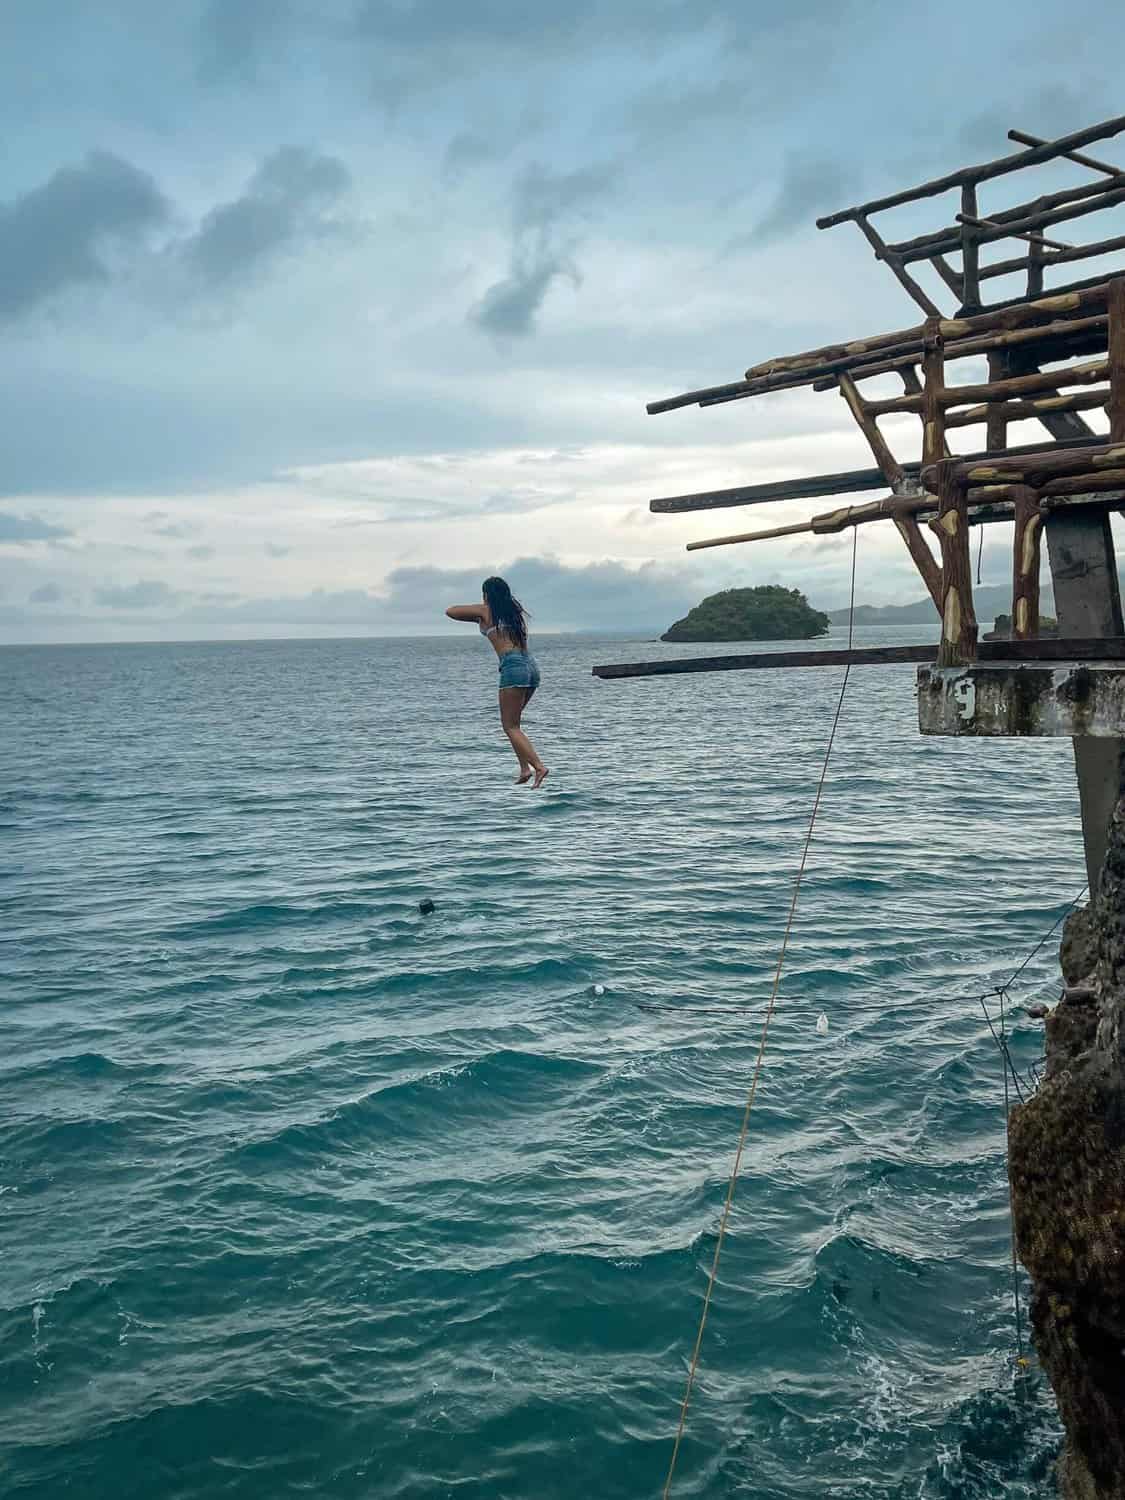 Me mid-air during a cliff dive into the sea in Boracay.